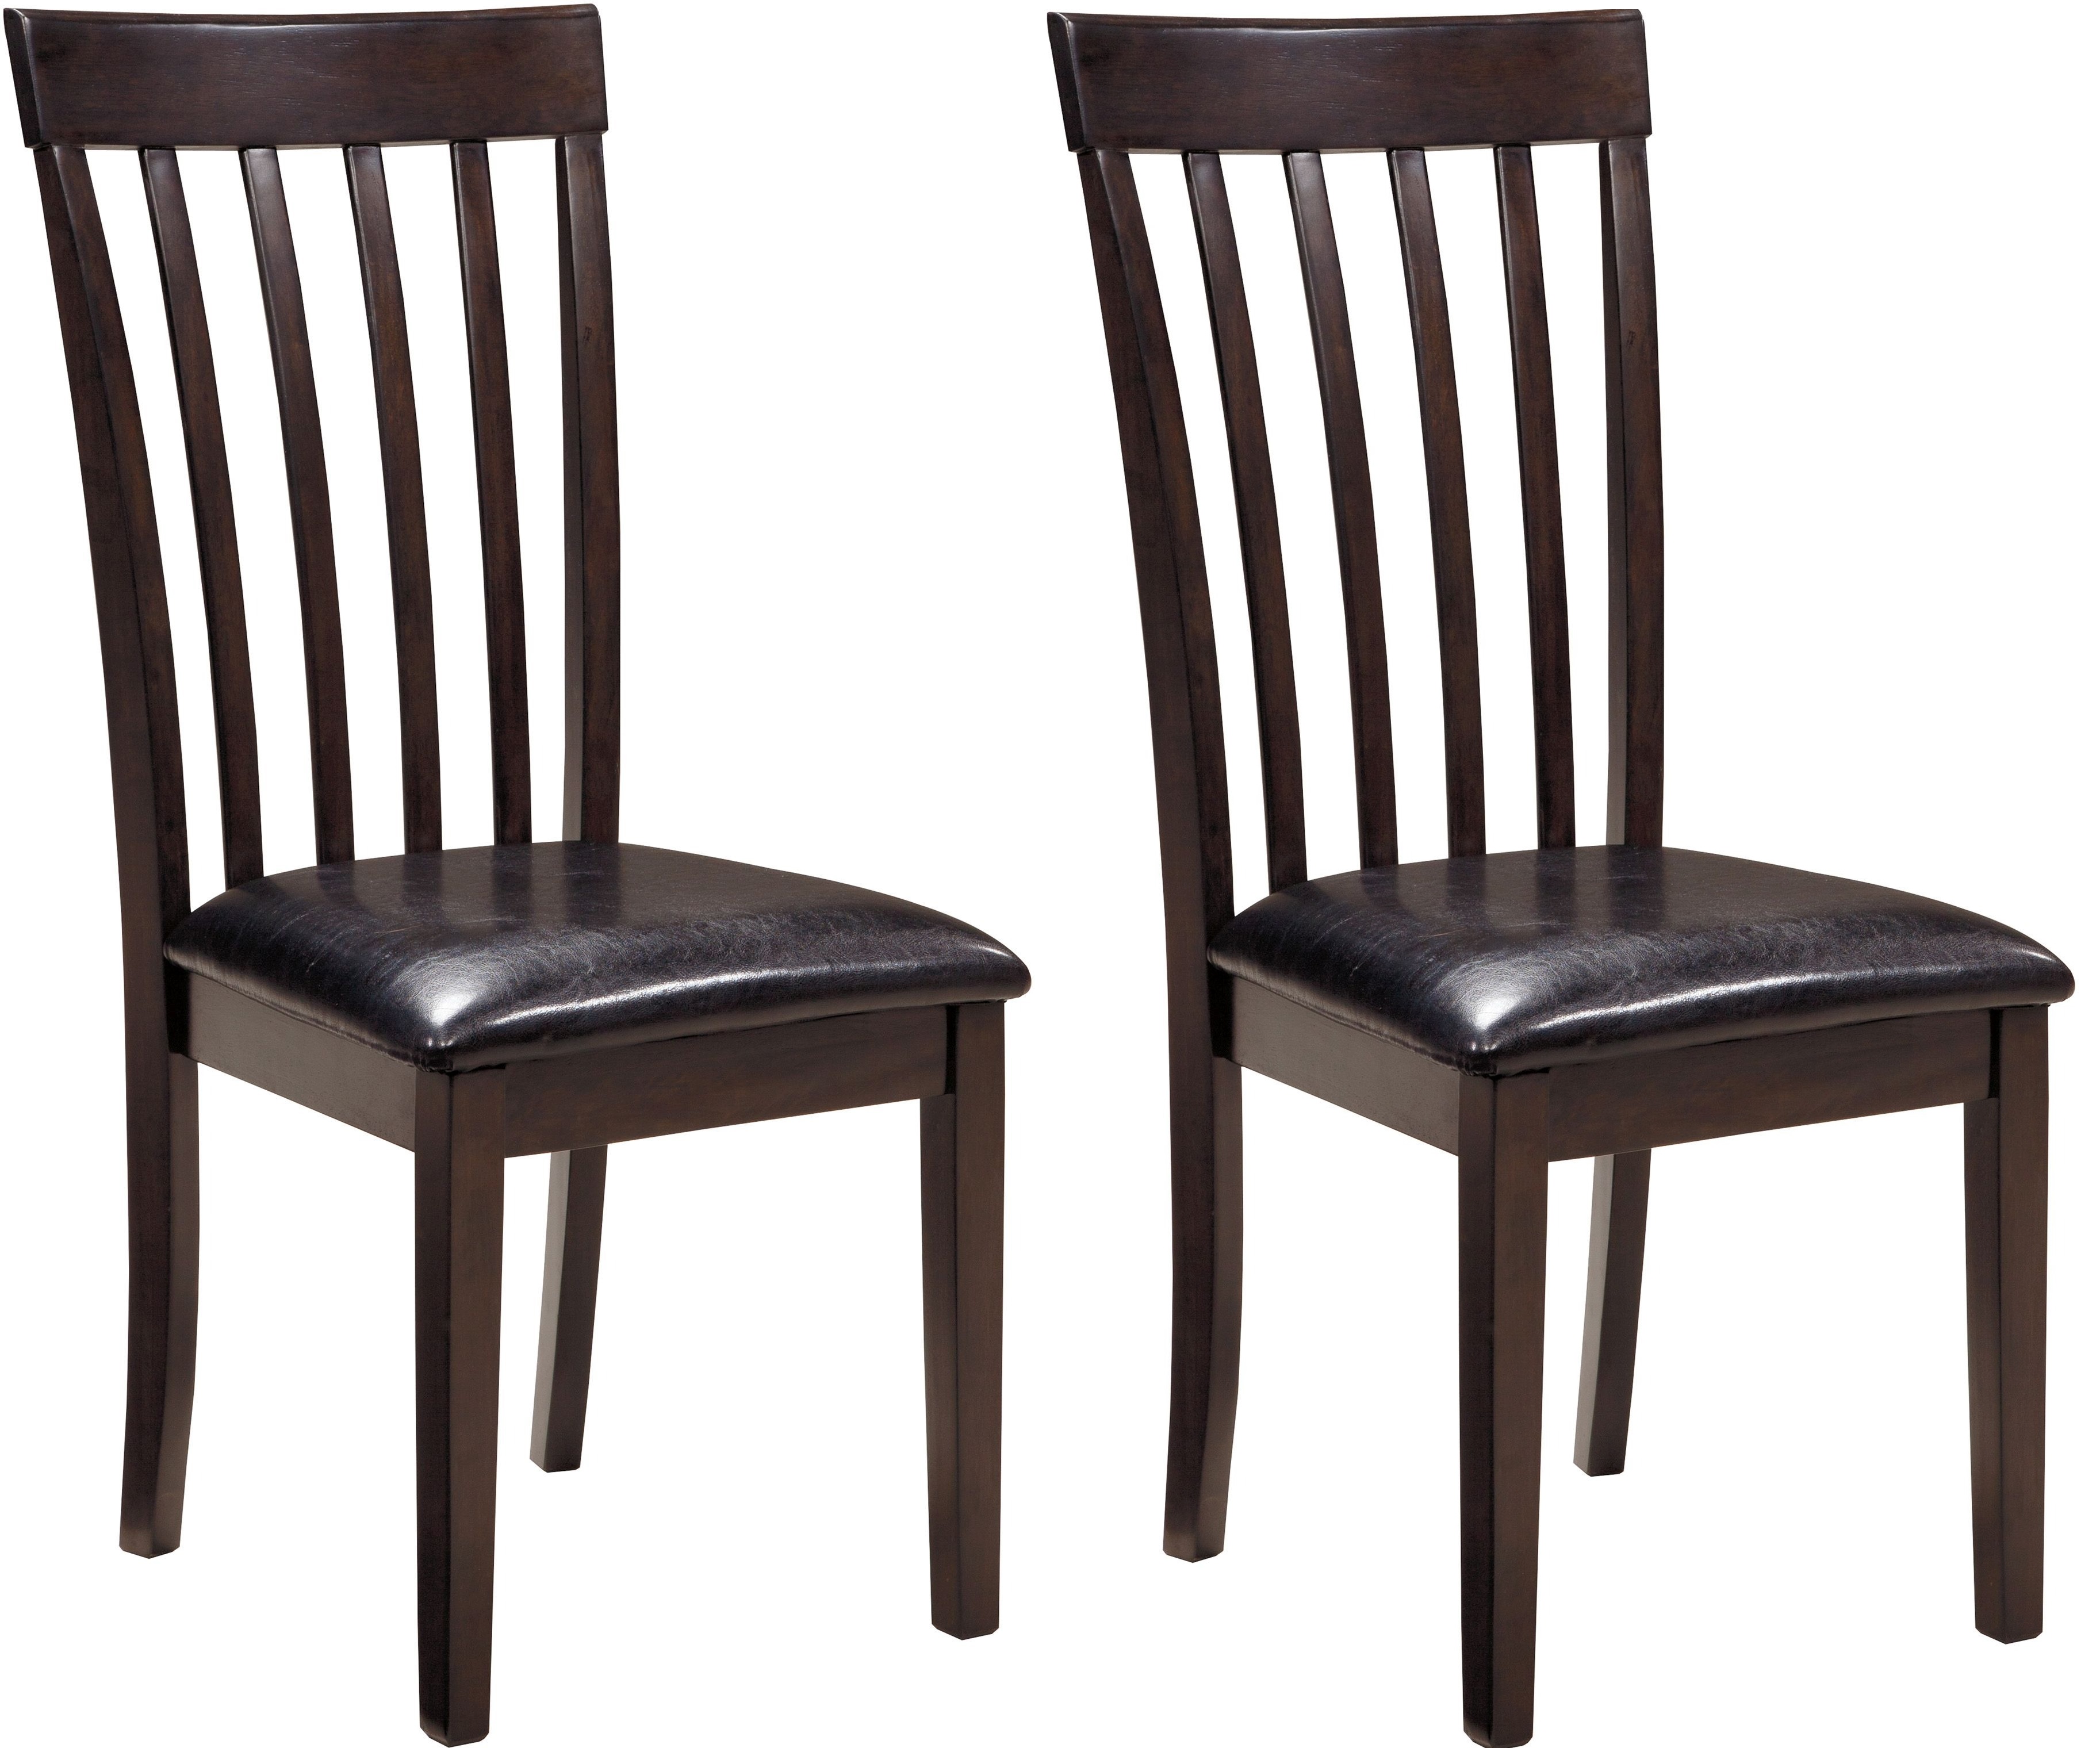 Ashley Brown Dining Room Chair Mrp 83108